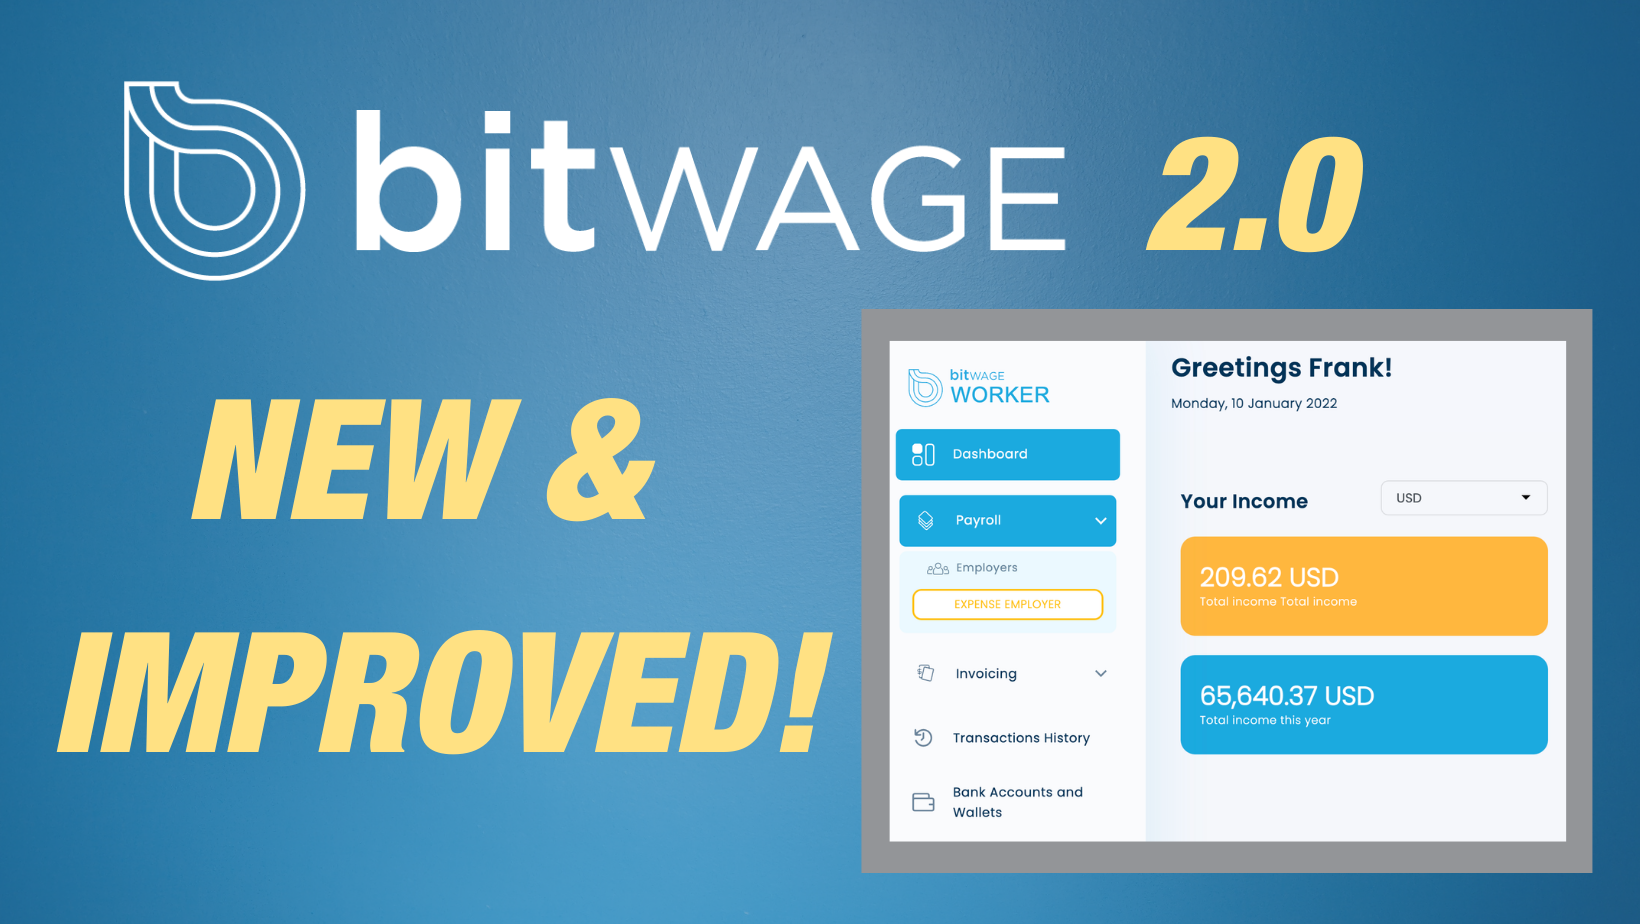 Bitwage Launches New Bitcoin & Cryptocurrency Payroll Platform for All Users